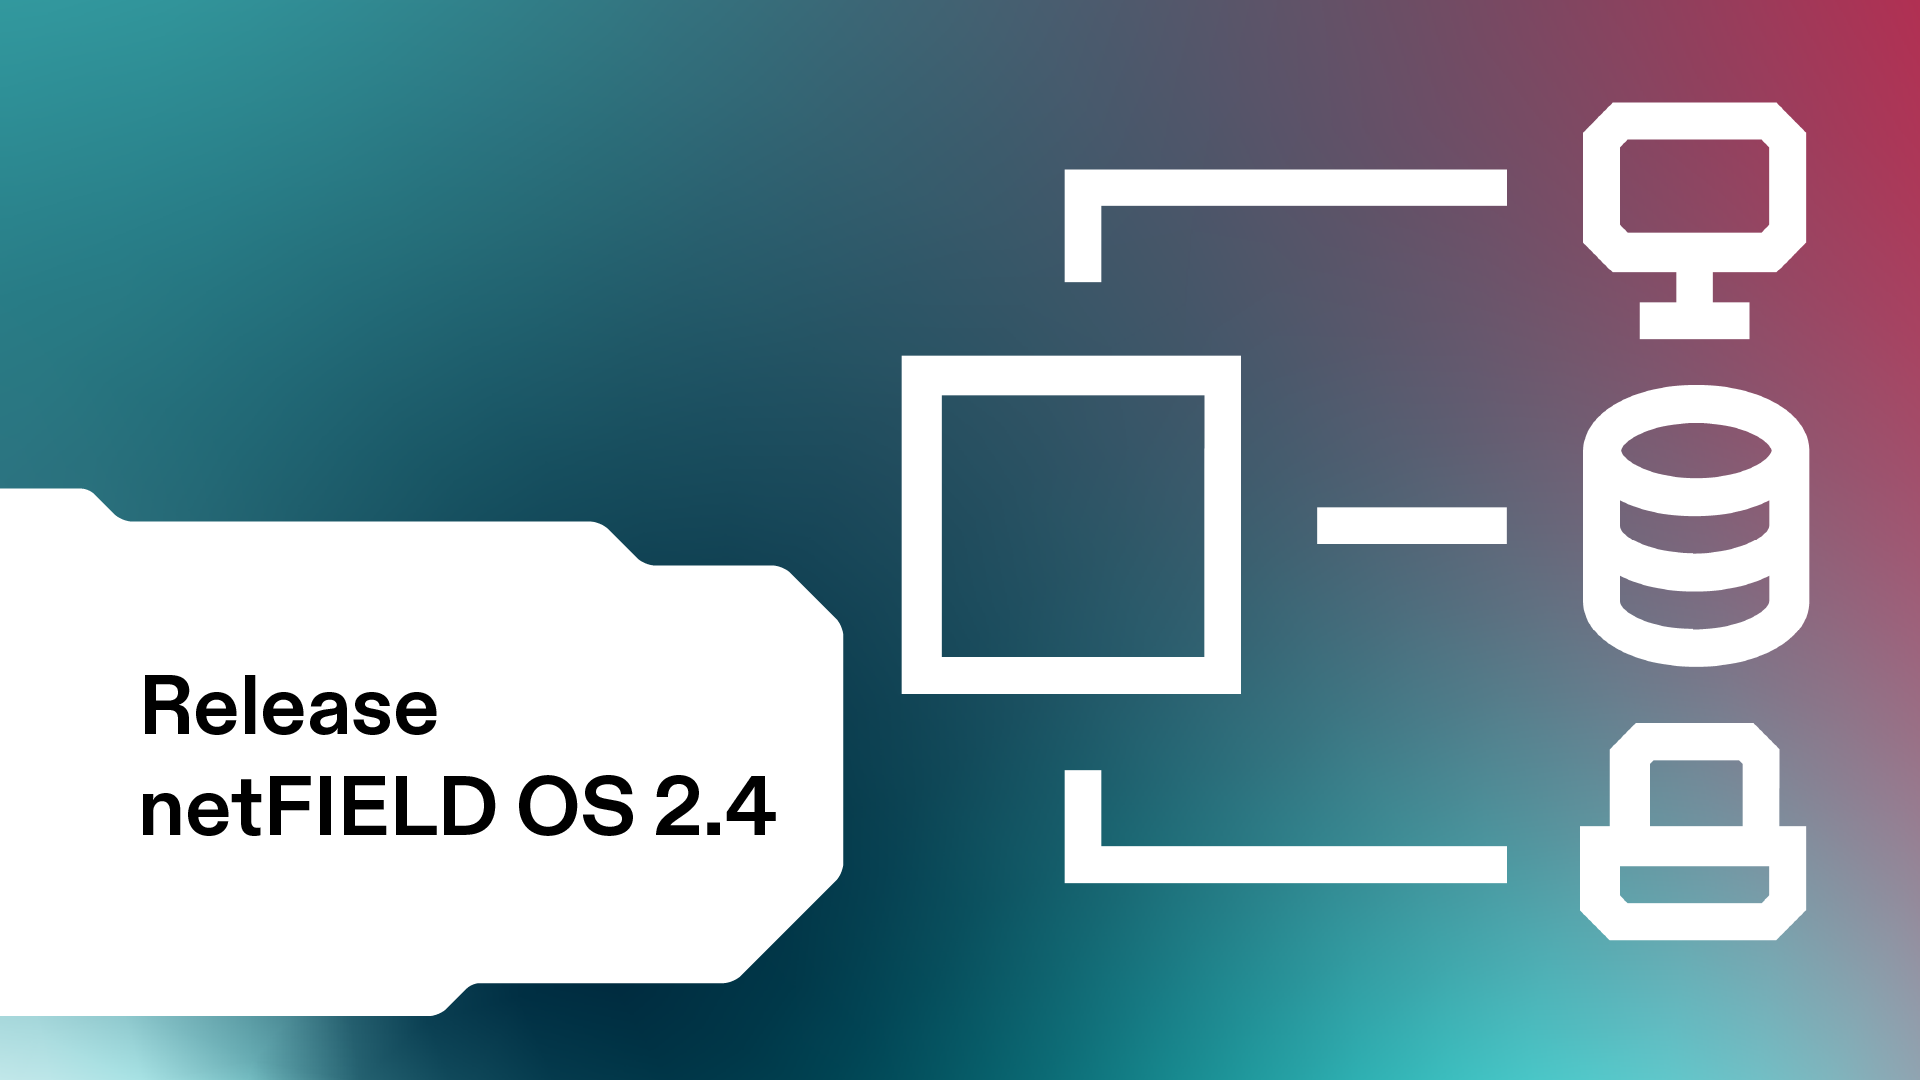 A white square with three smaller netFIELD icons also in white on the right side. They are connected with white lines on a dark blue background. On the left side, "Release of netFIELD OS 2.4" is written on  white background.